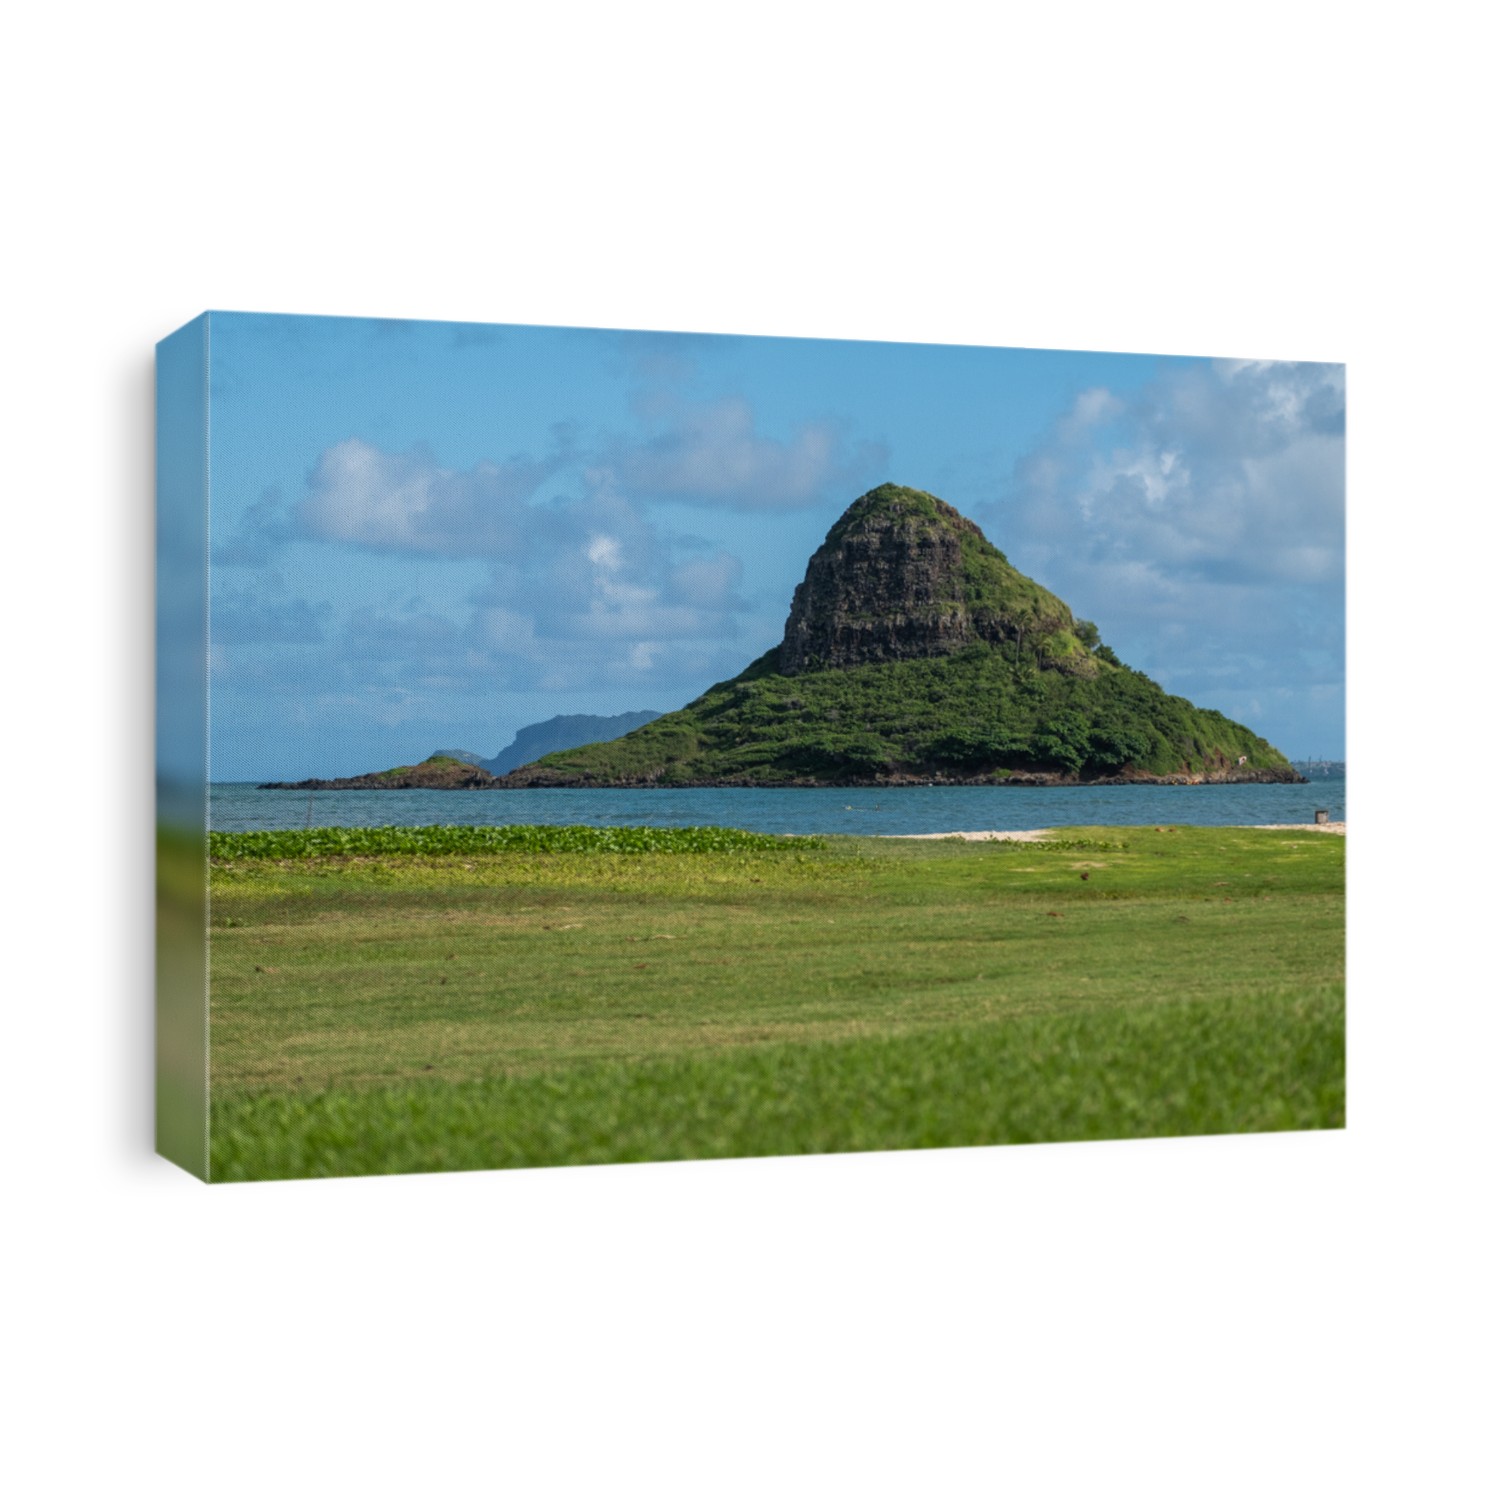 The island of Mokolii, also known as Chinaman’s Hat, Oahu, Hawaii